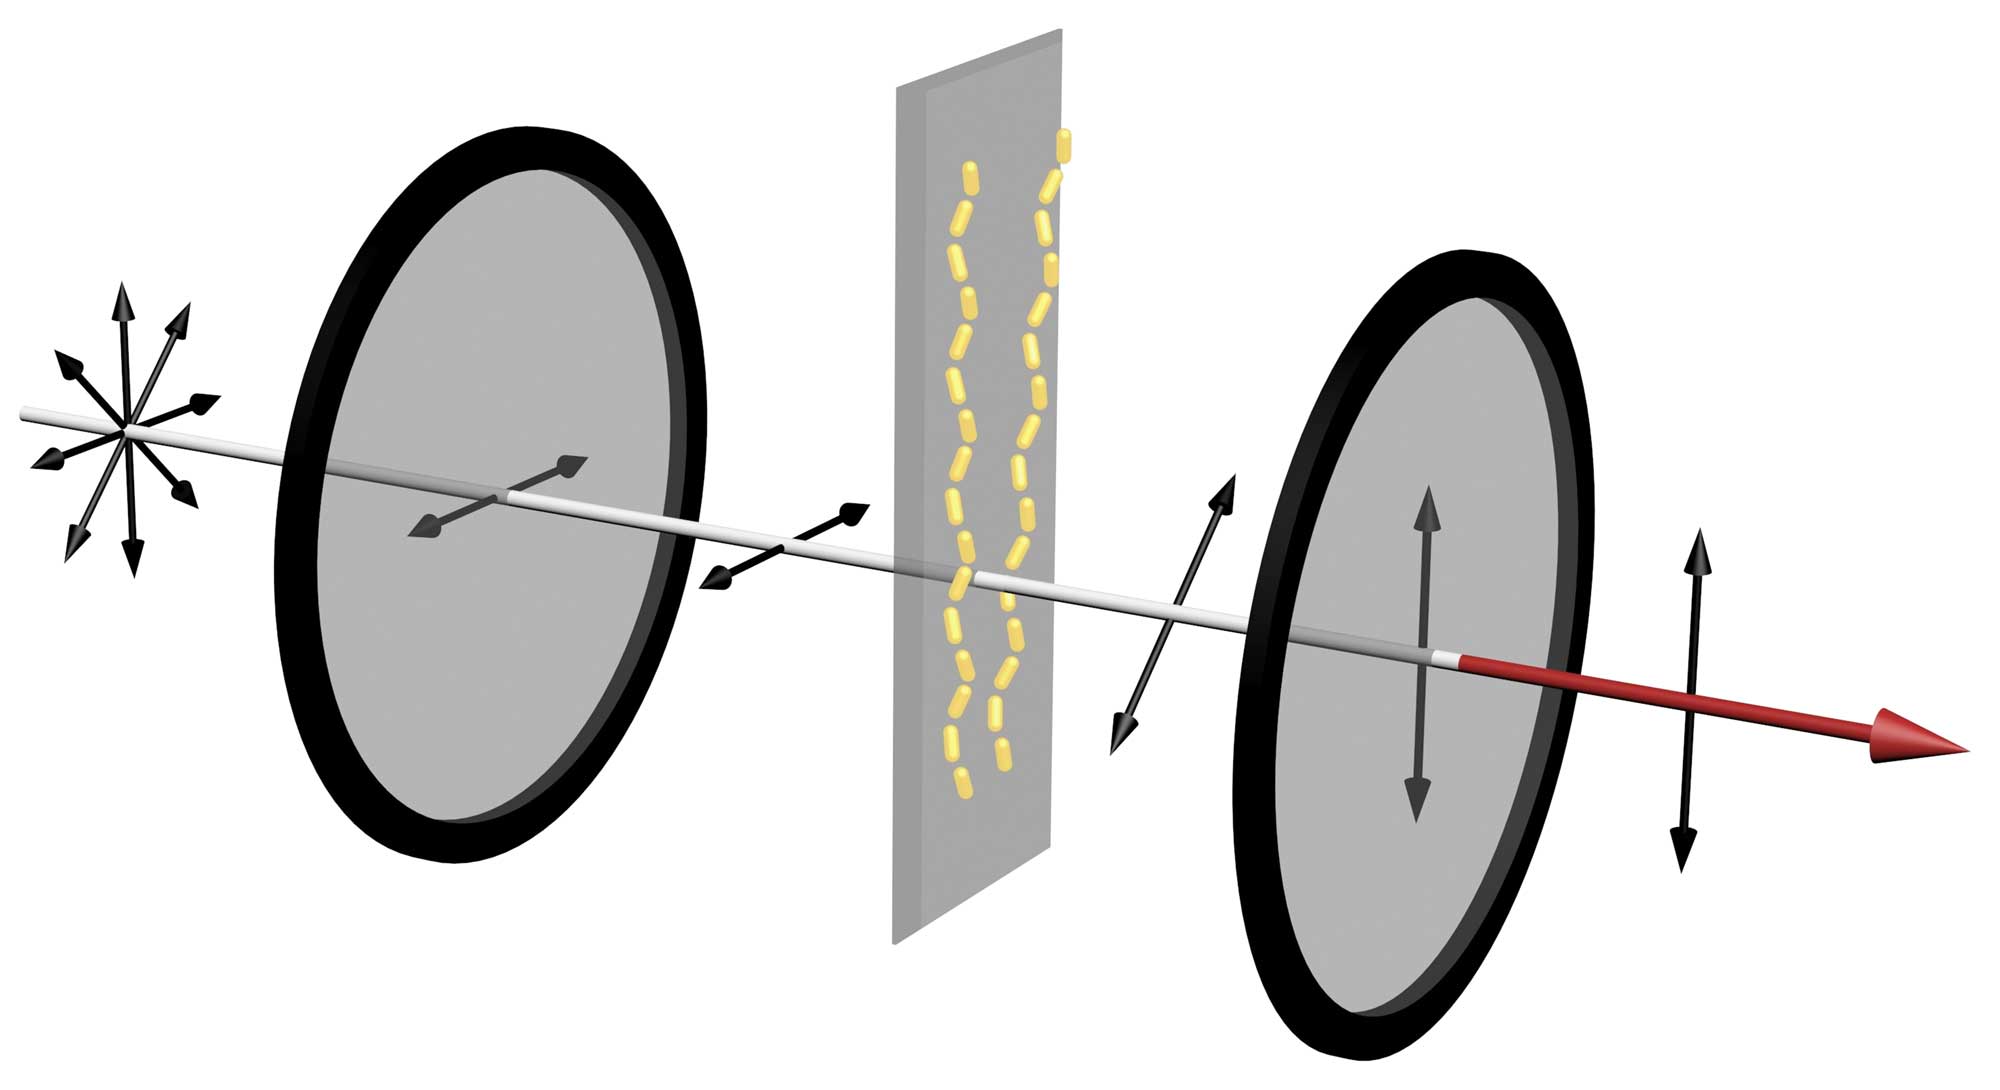 In a device that can reveal whether amyloid proteins are assembling into chains, unpolarized light enters a horizontal polarizer. This only allows waves oscillating in the horizontal direction to get through. Then, if the amyloid proteins have assembled the gold nanorods into chains, red light gets twisted, changing the angle of its polarization. Then, when it passes through the vertical polarizer, the portion of the light oscillating in the vertical direction gets through. This results in a strong red signal that can be seen with the naked eye. Courtesy of Jun Lu, Jilin University and University of Michigan.